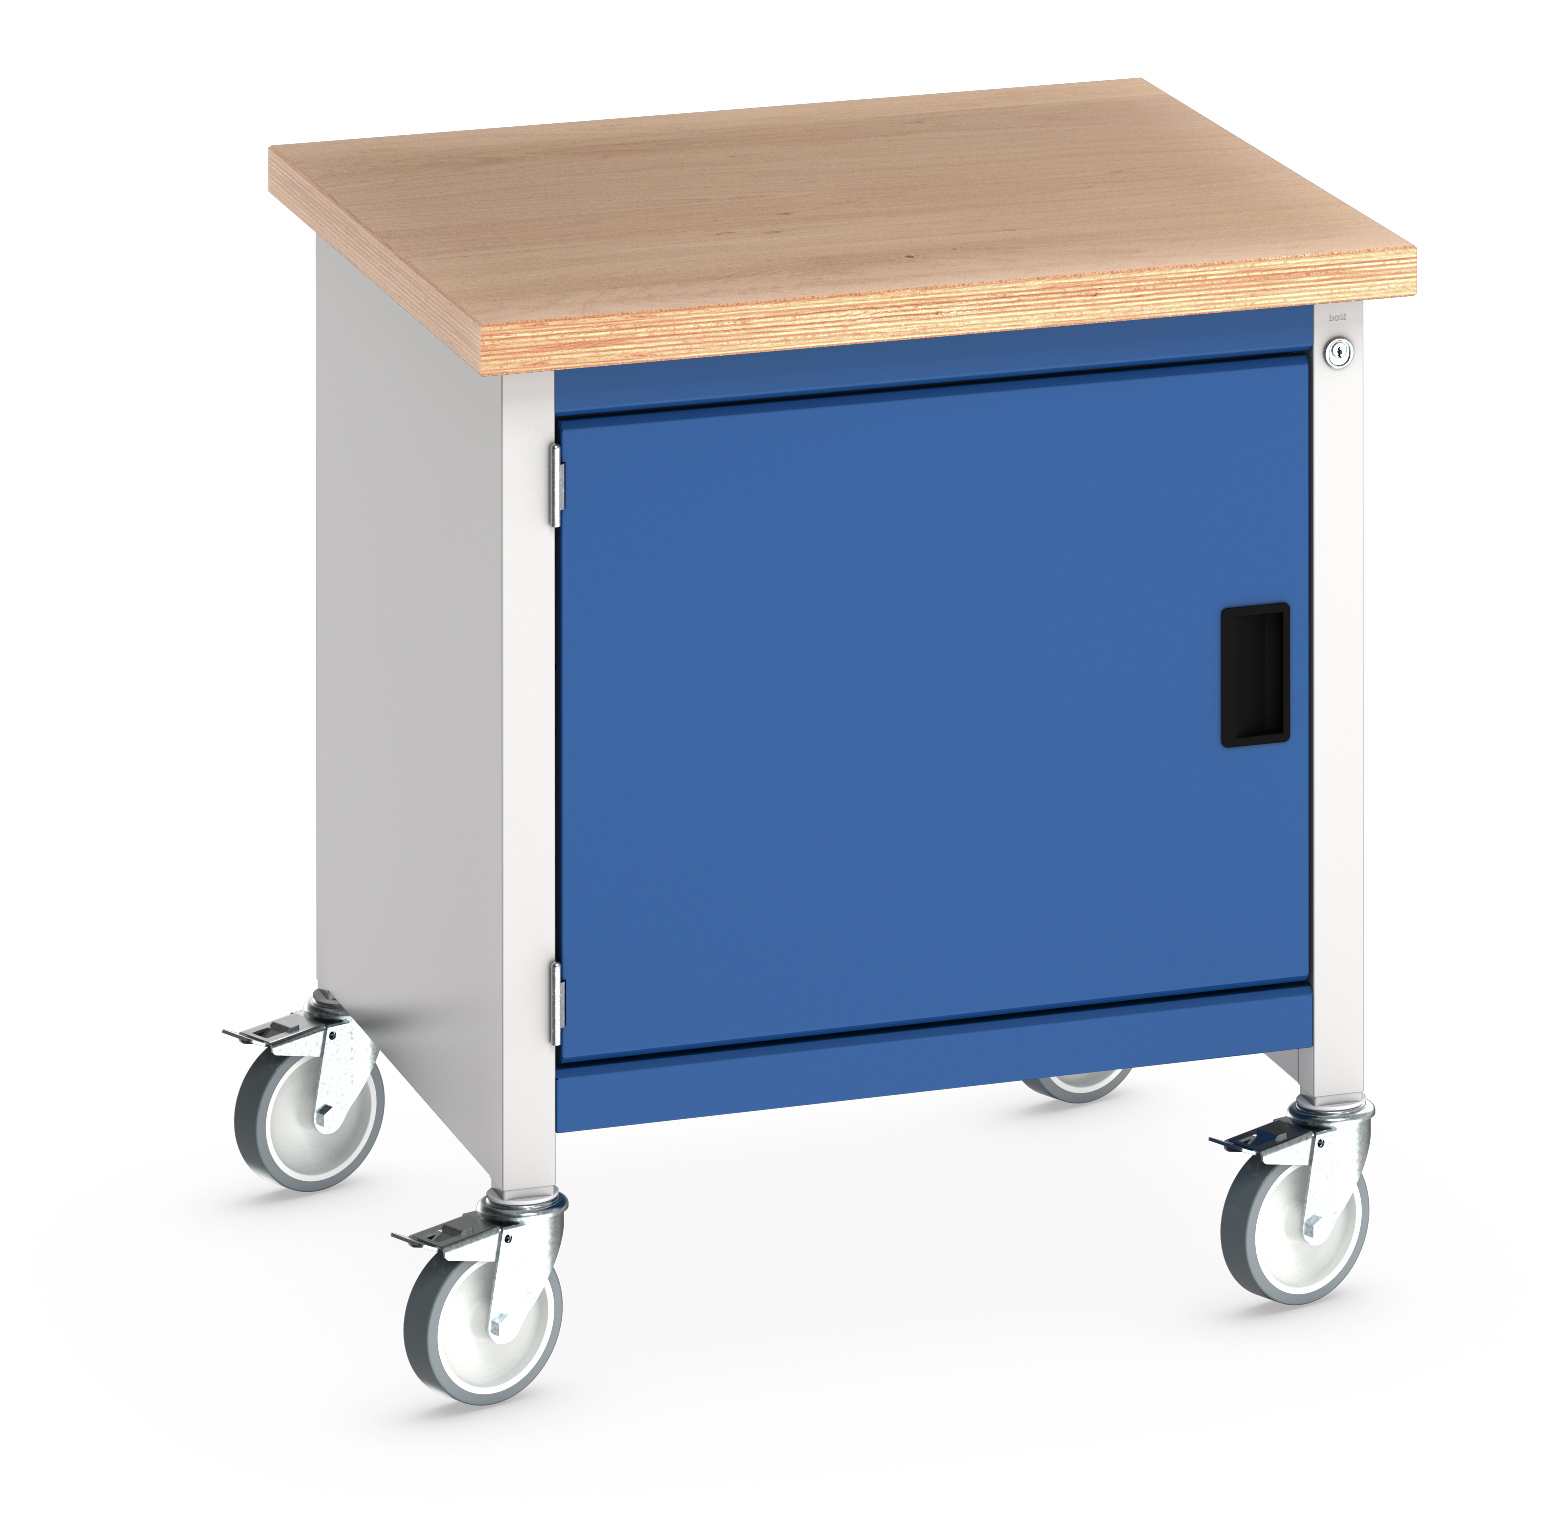 Bott Cubio Mobile Storage Bench With Full Cupboard - 41002085.11V